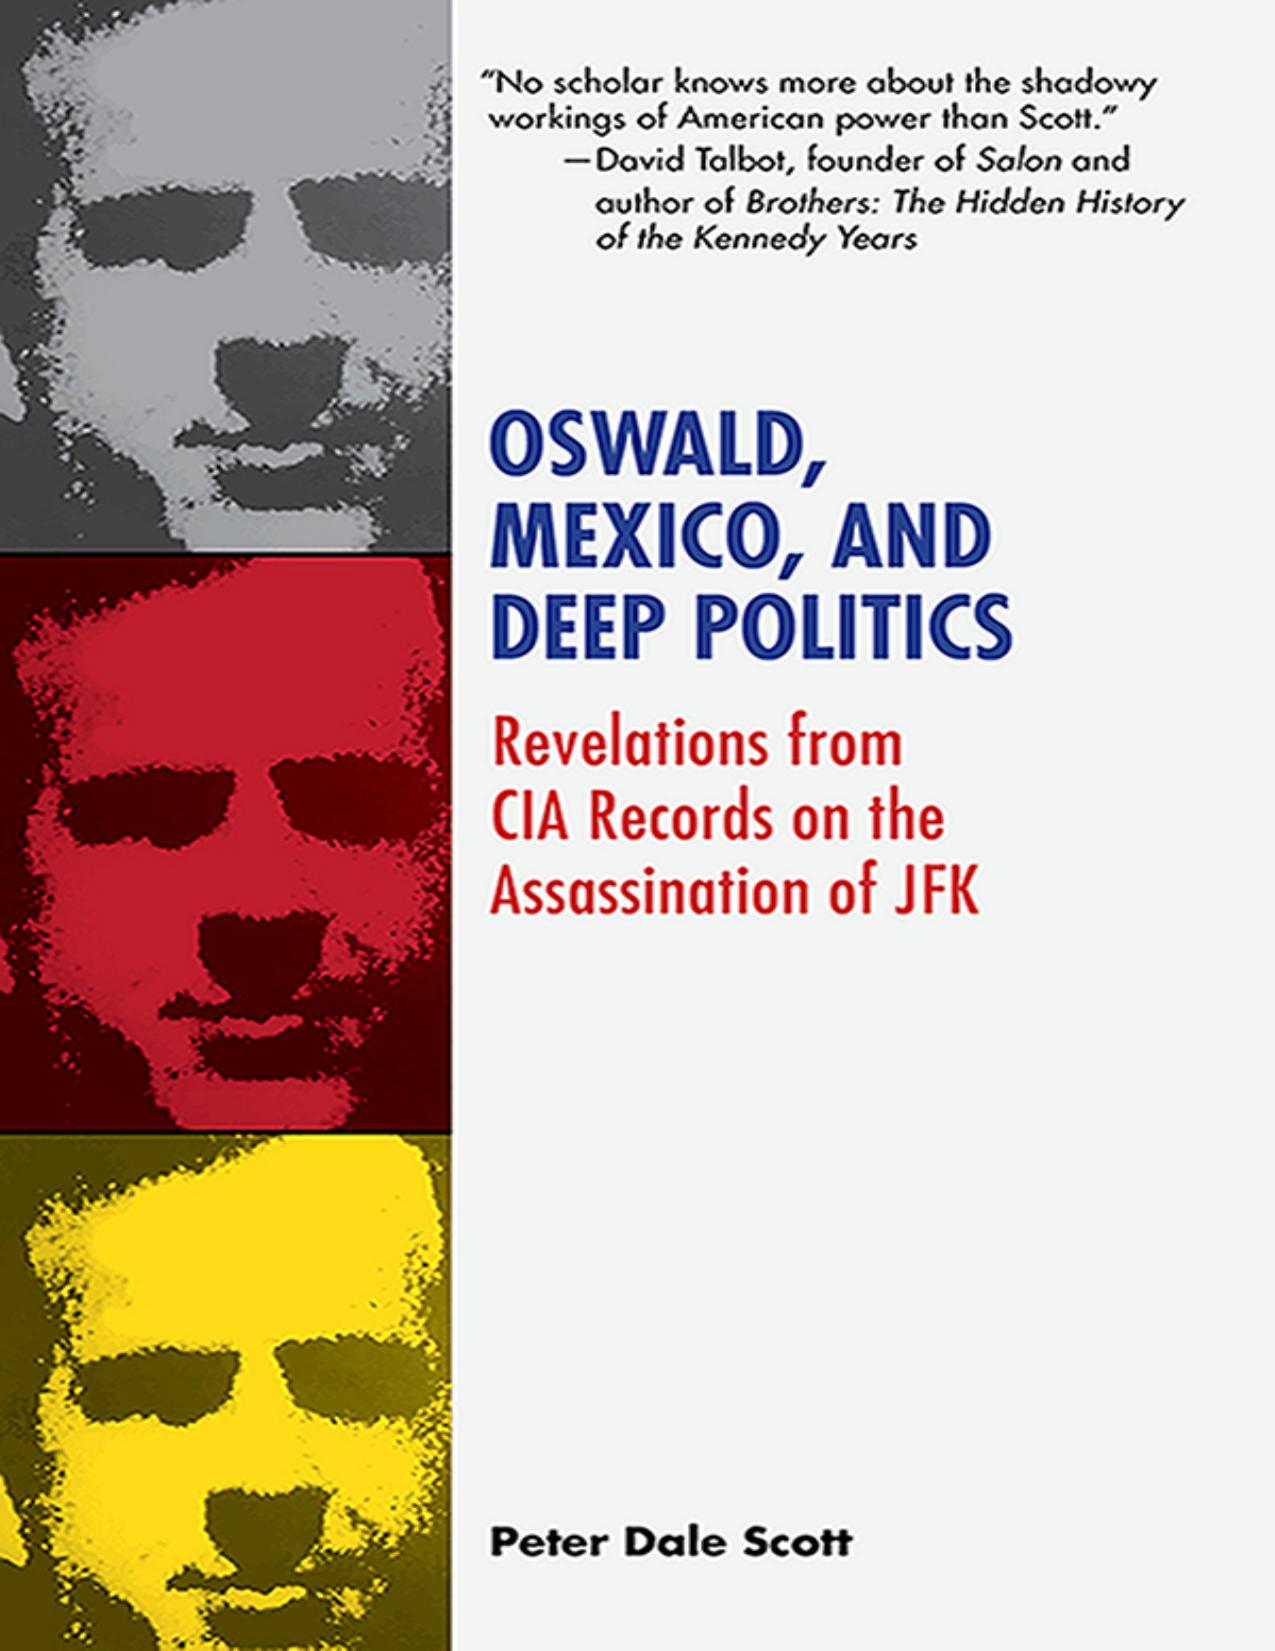 Peter Dale Scott - Oswald, Mexico and Deep Politics_ Revelations from CIA Records on the Assassination of JFK